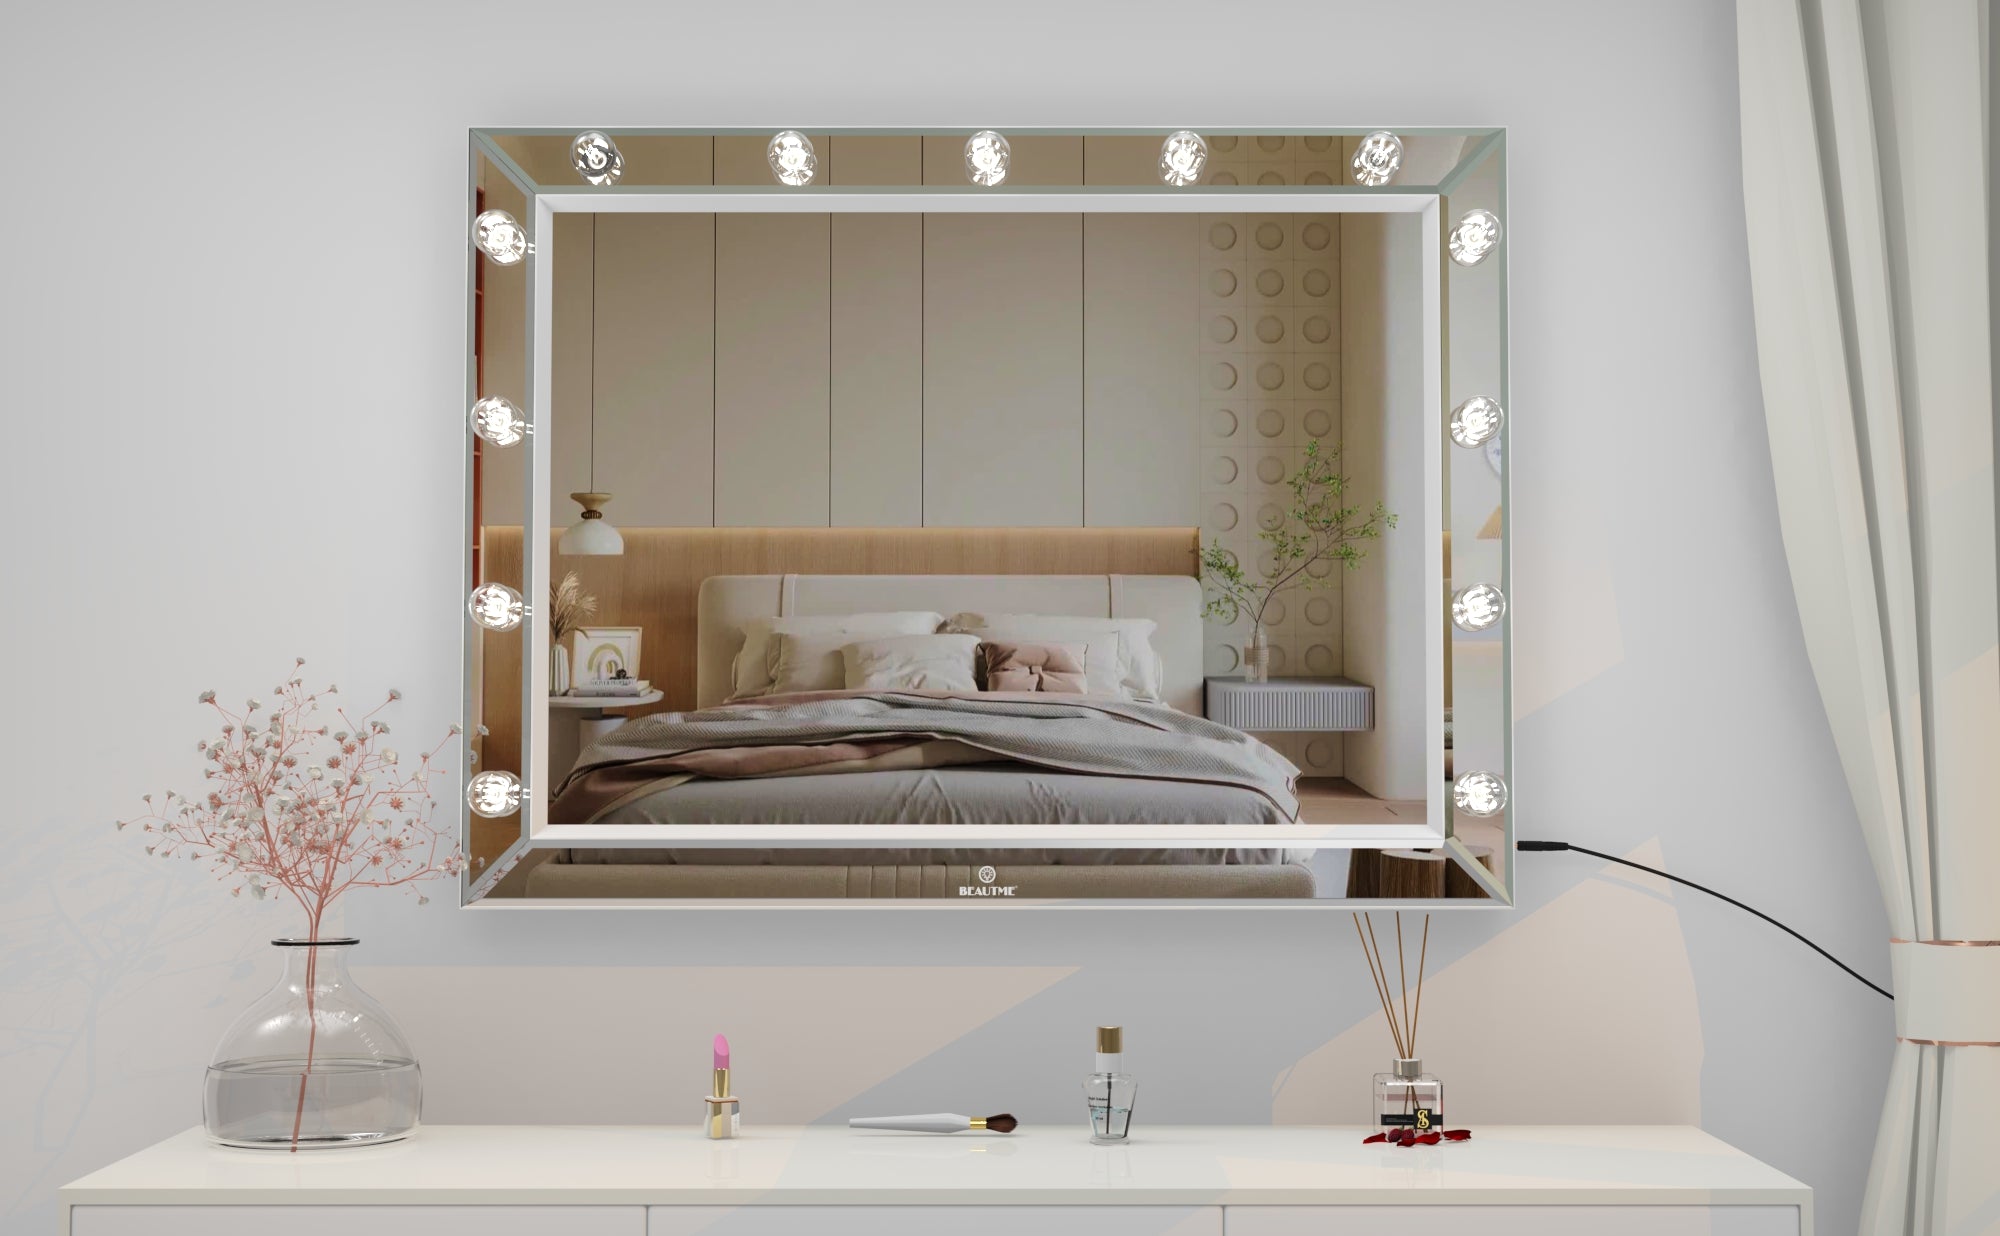 Hollywood Vanity Mirror with Uss Bulbs Luxury Vanity Mirror with Lights Large Size Makeup Mirror for Bedroom Makeup Room, Smart Touch White Lighting,40x30.5 inch